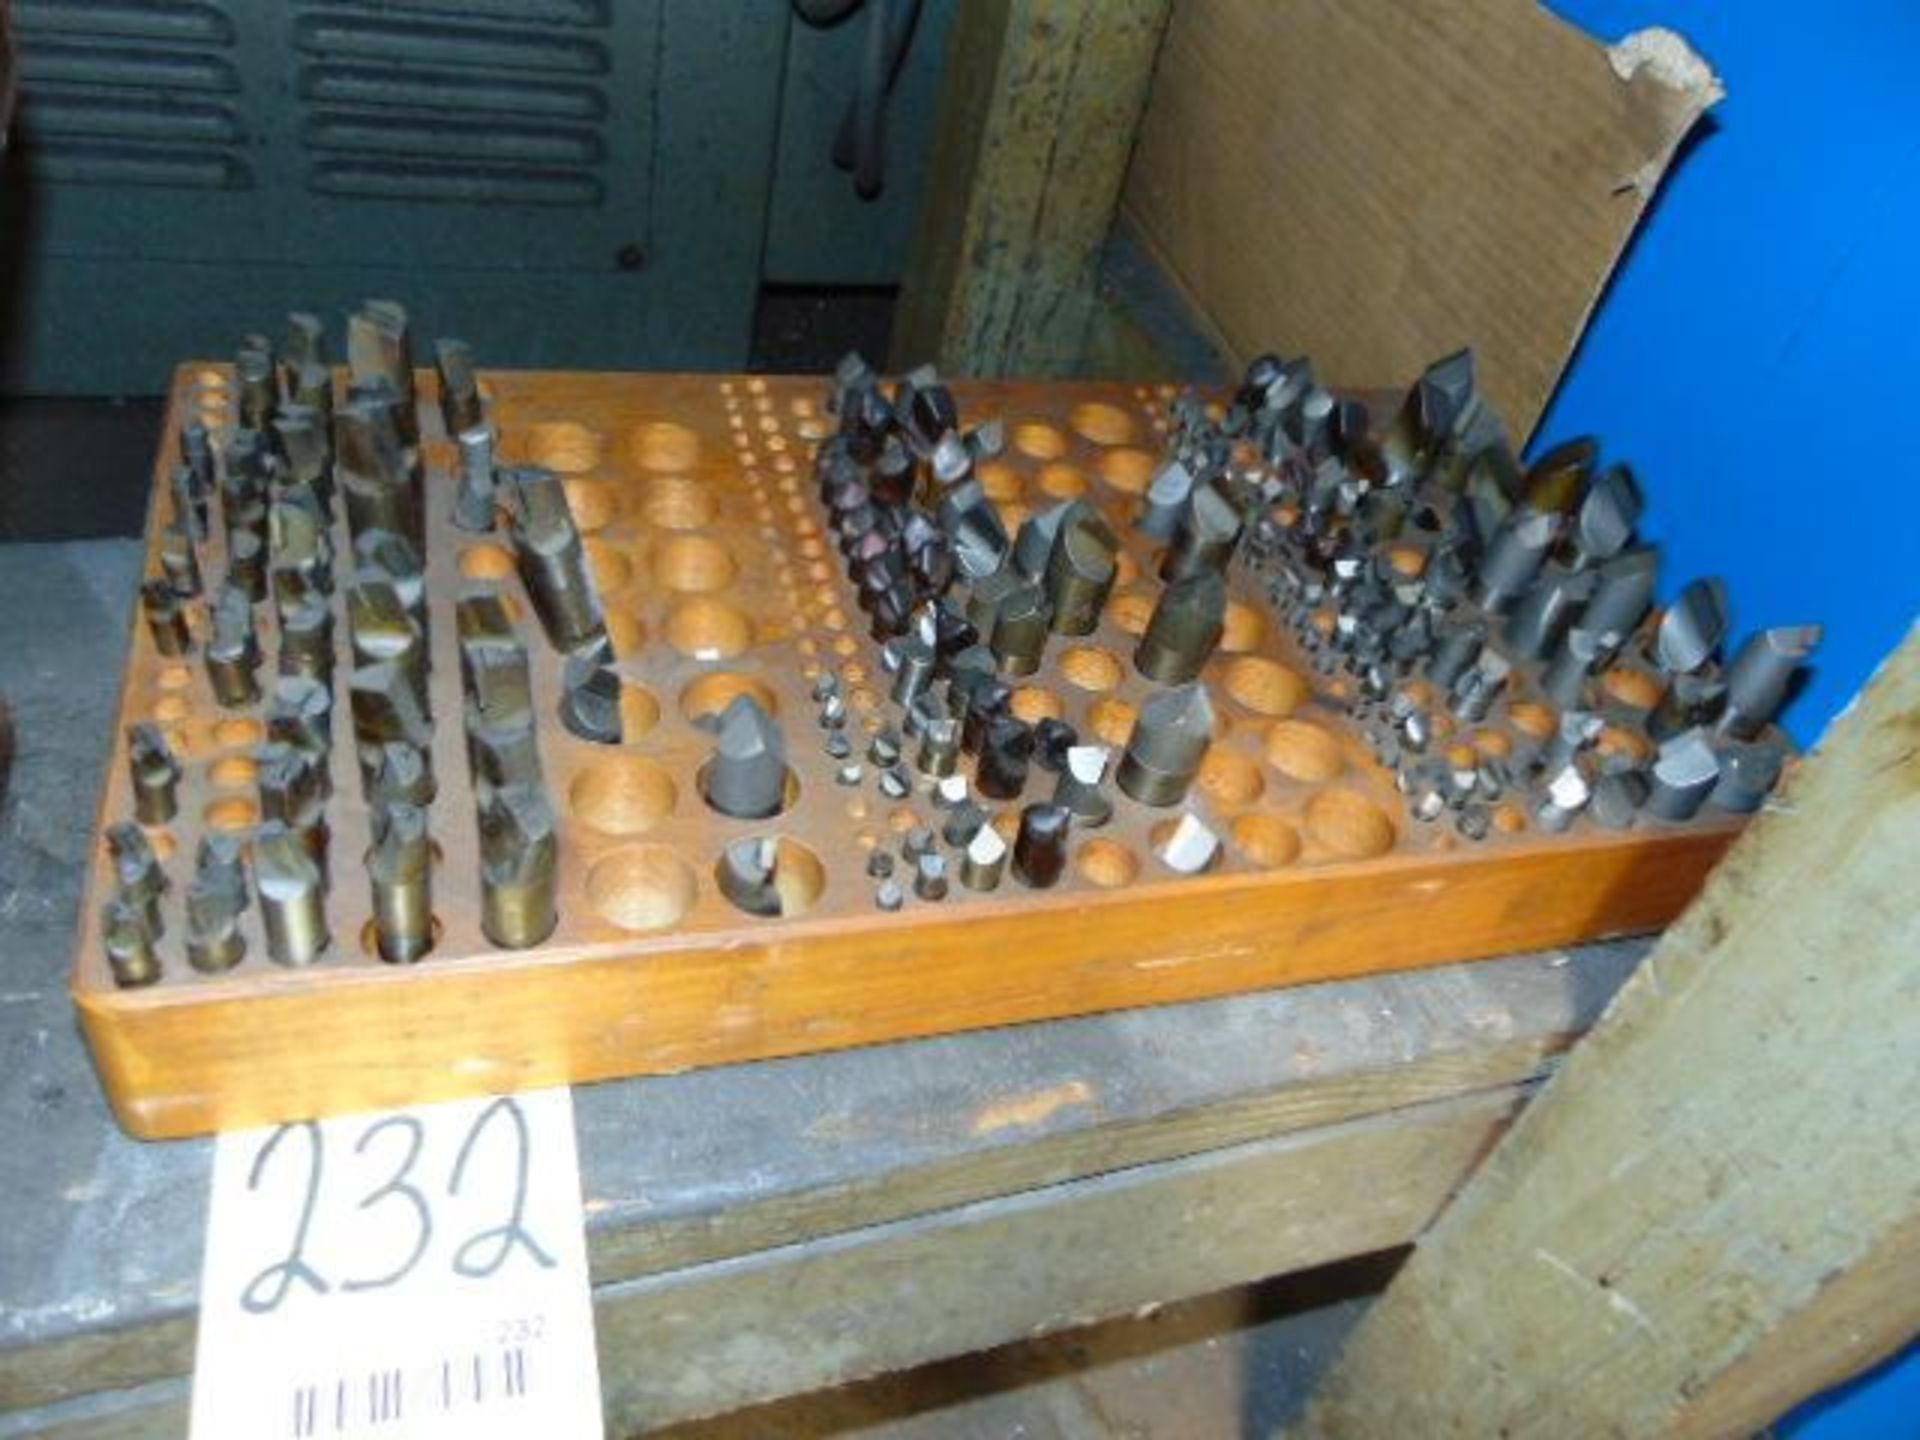 LOT OF CARBIDE TIPPED BORING BITS, assorted